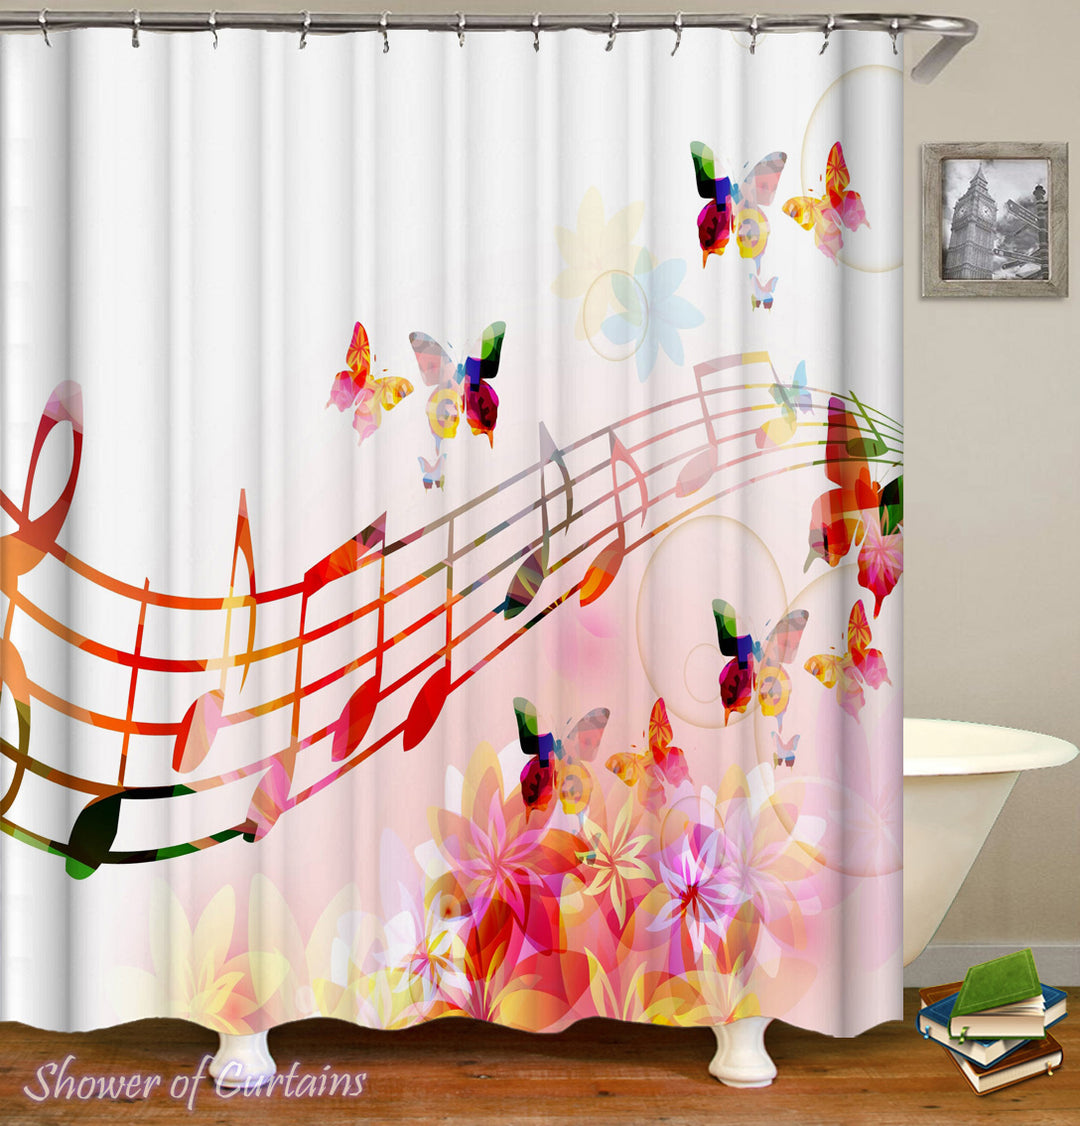 Music Shower Curtain - Colorful Musical Notes